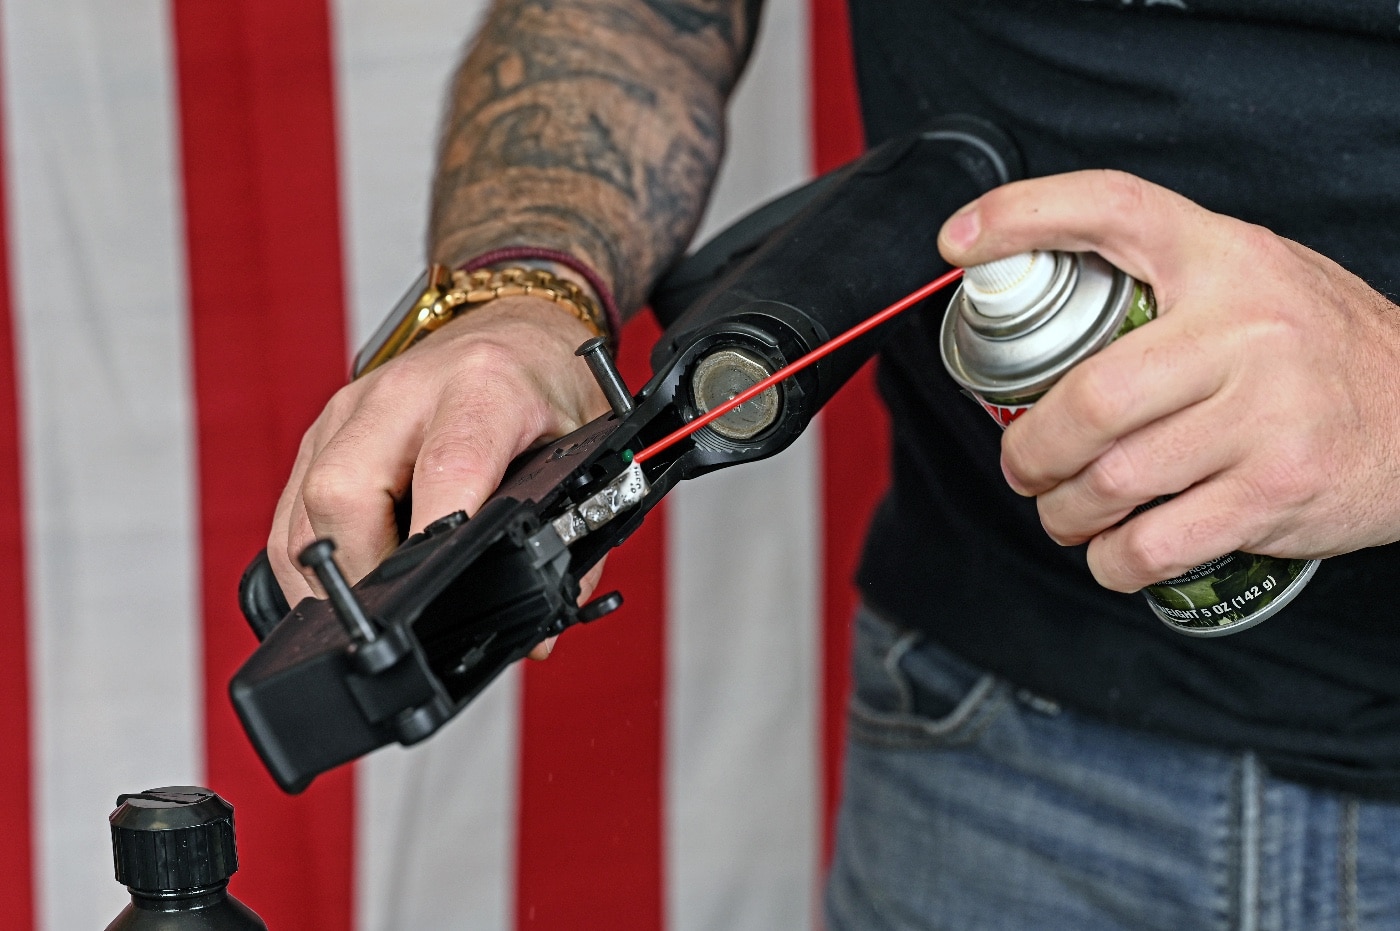 In this photo, we see the author applying gun cleaner to the lower receiver of his rifle to help clean it. A rifle is a long-barreled firearm designed for accurate shooting and higher stopping power, with a barrel that has a helical pattern of grooves cut into the bore wall.